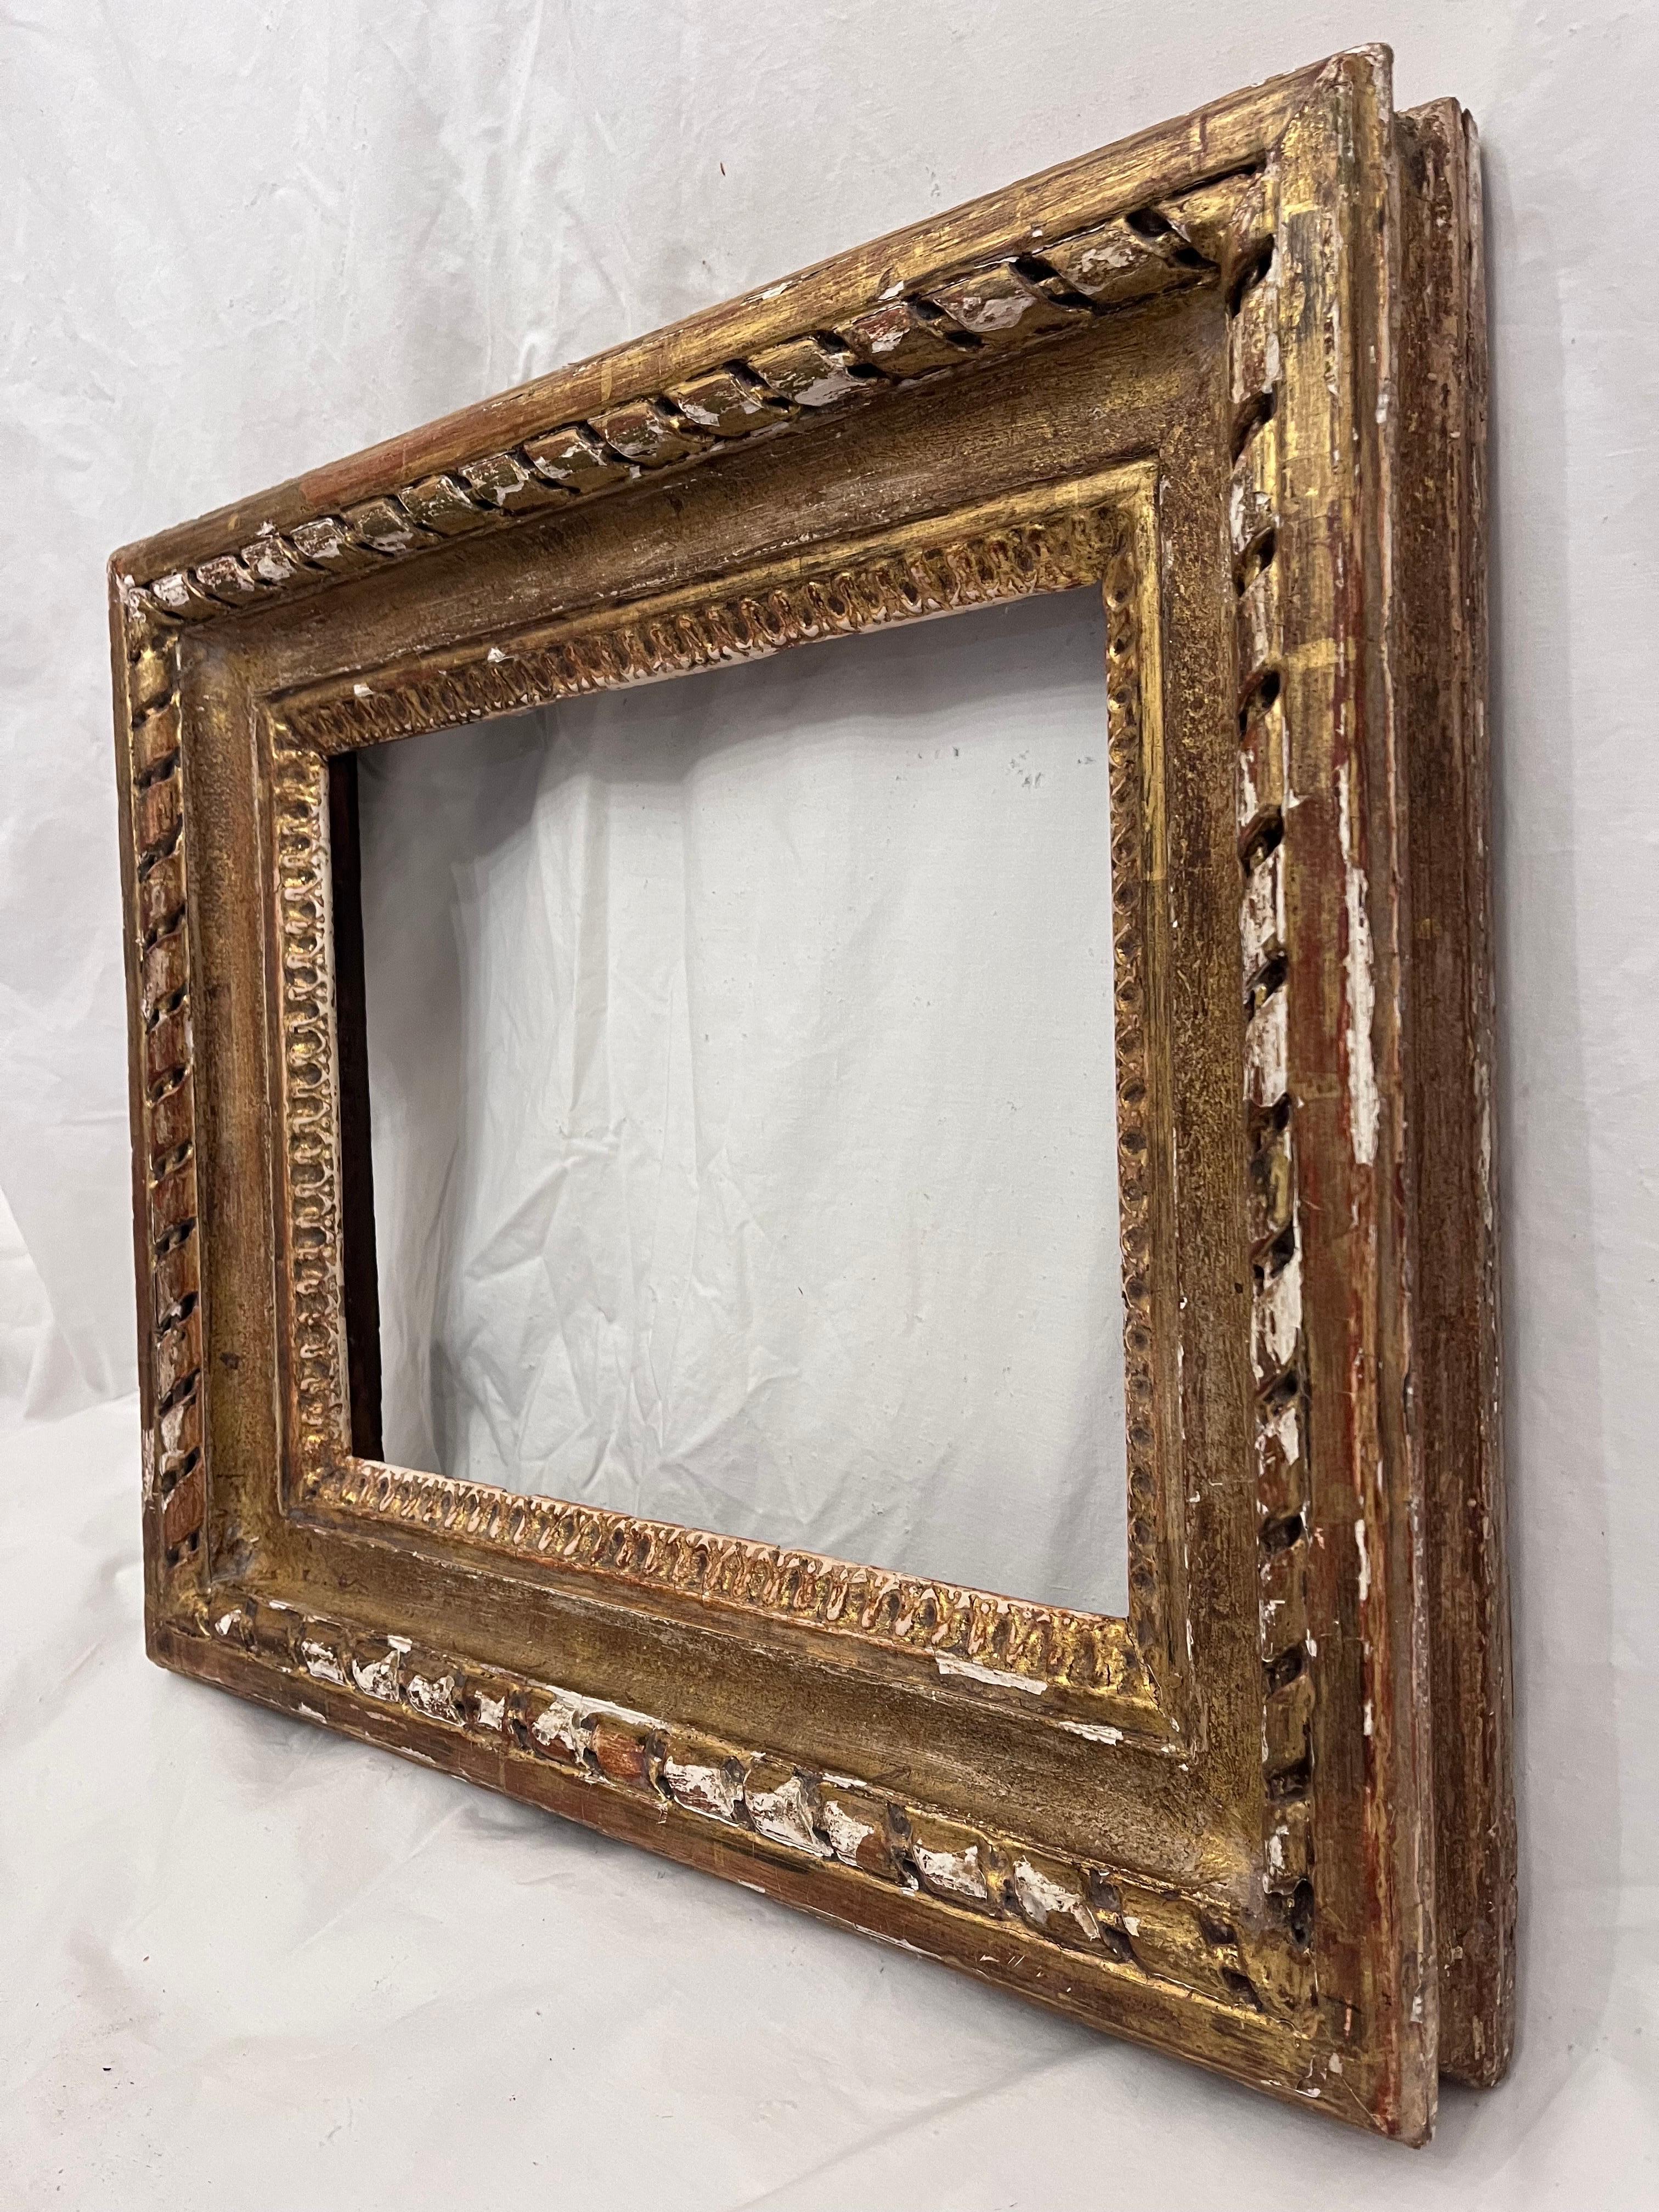 Wood 19th Century Antique French Gold Gilt Picture Frame 13 x 10 inch Circa 1880